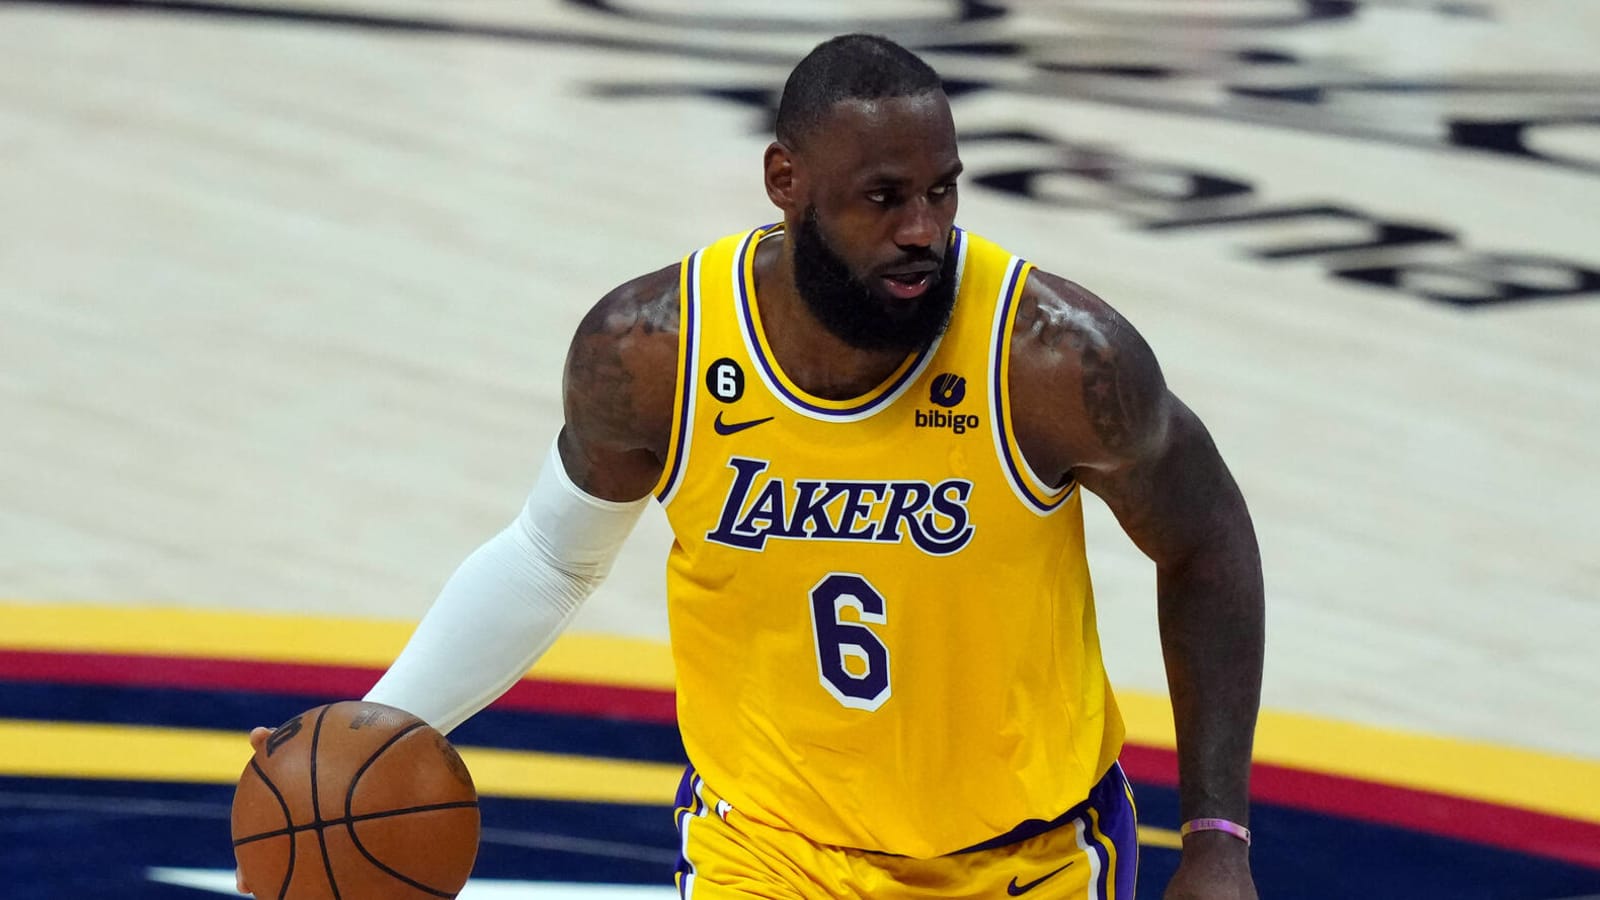 LeBron James offers update on ankle injury ahead of Game 3